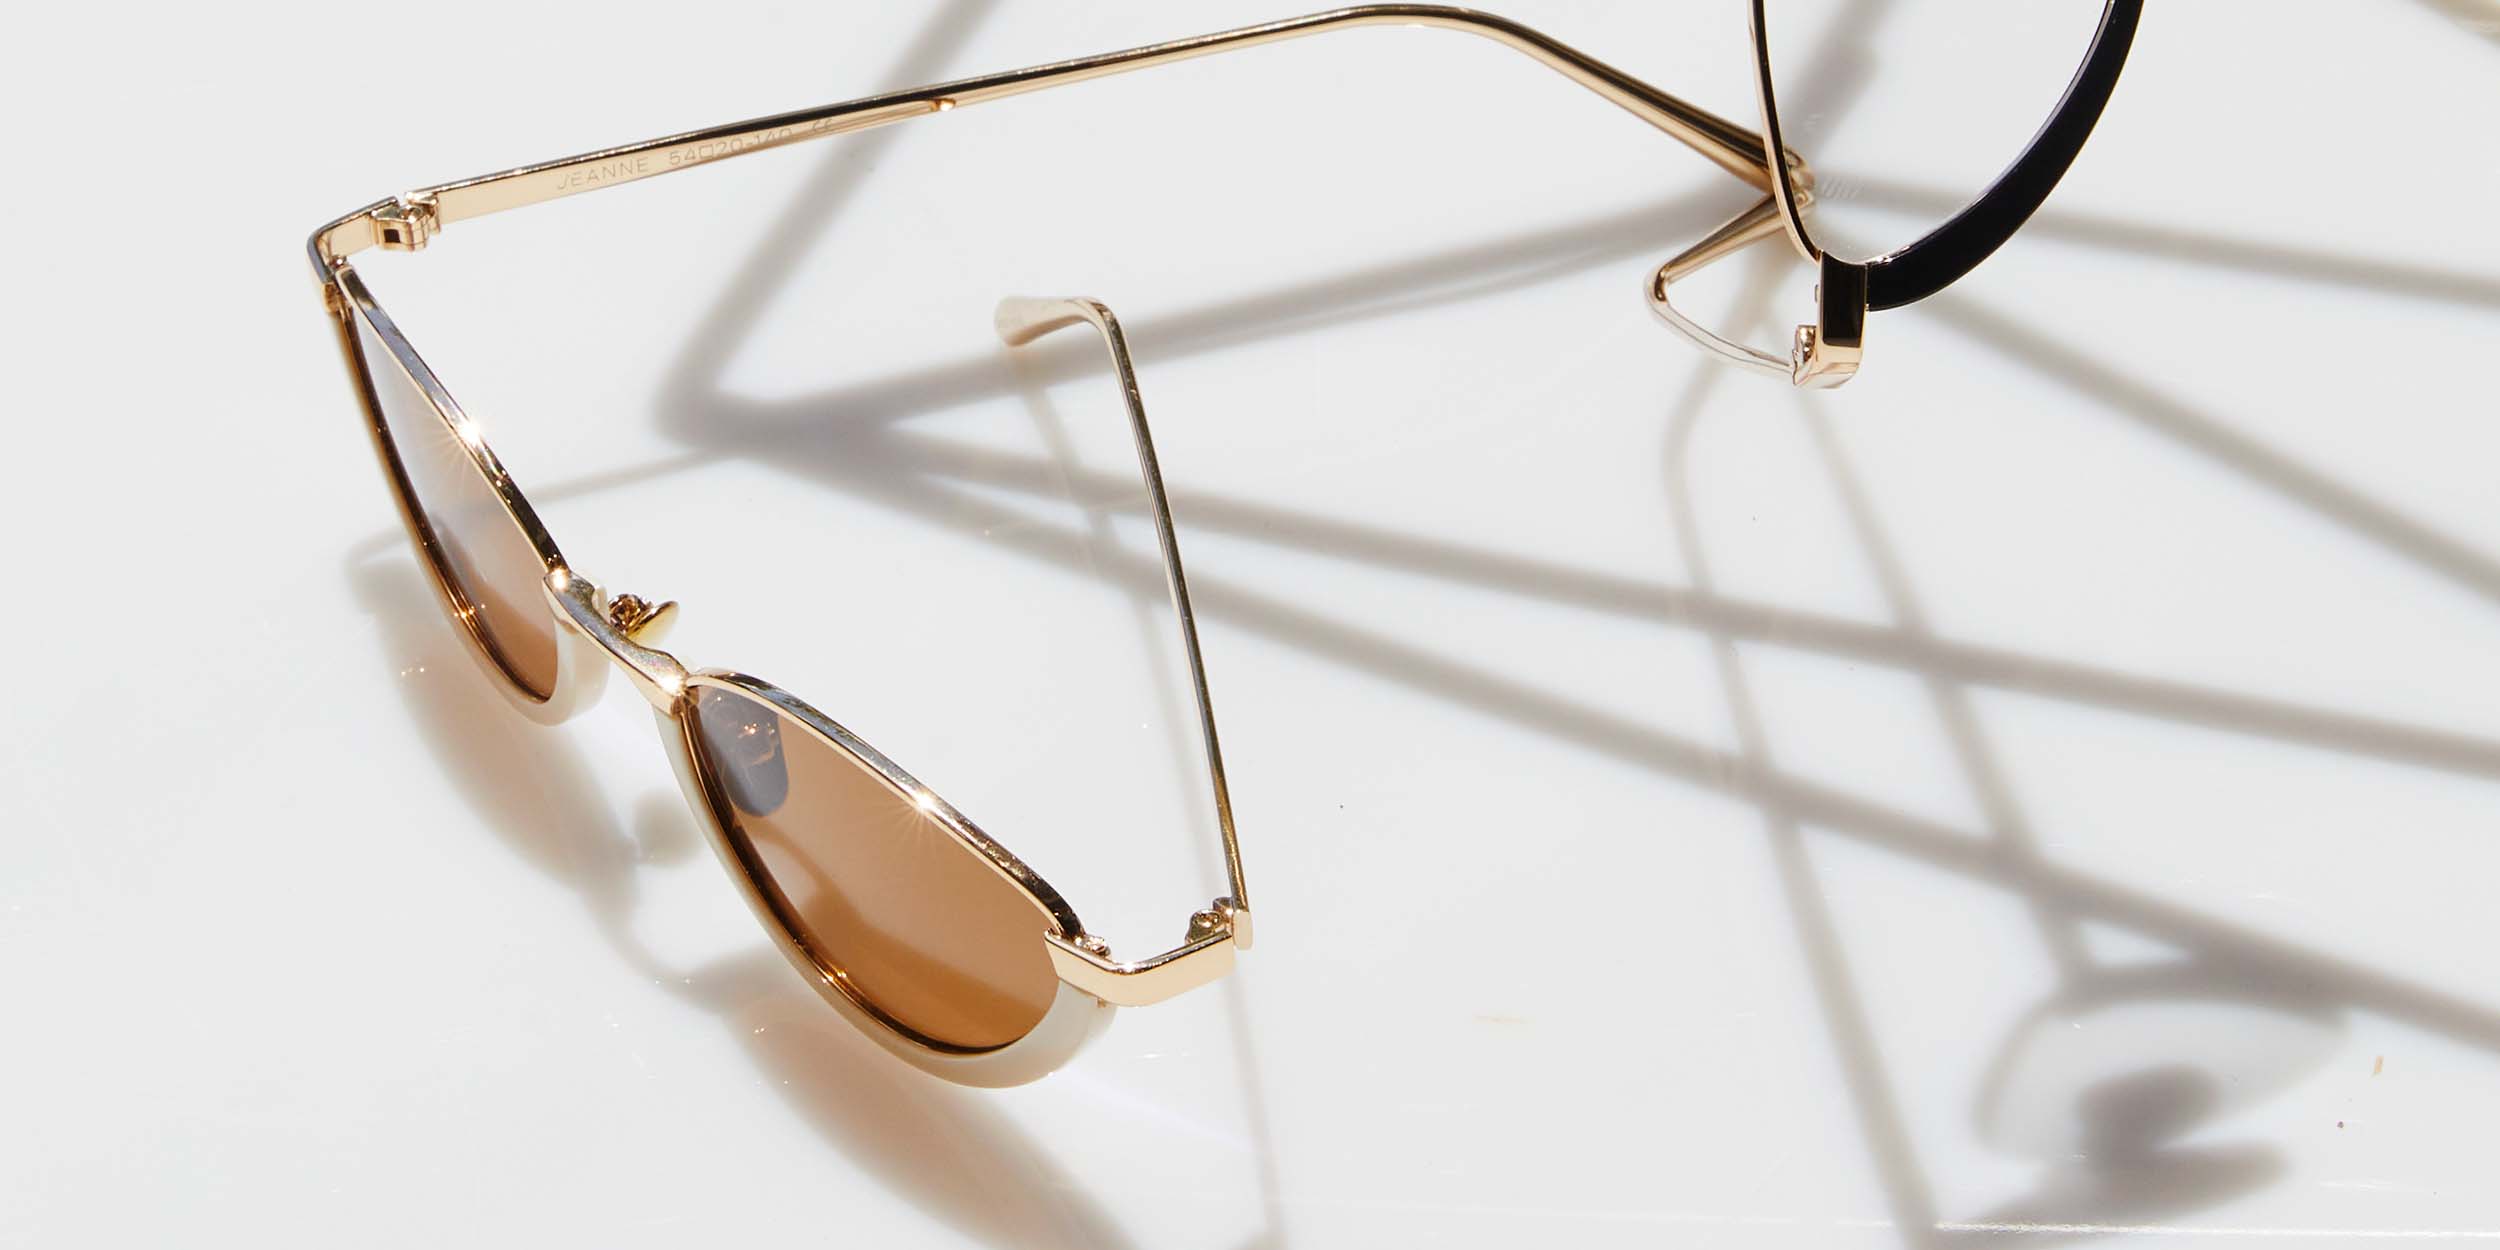 Photo Details of Jeanne Sun Cobalt & Gold Sun Glasses in a room